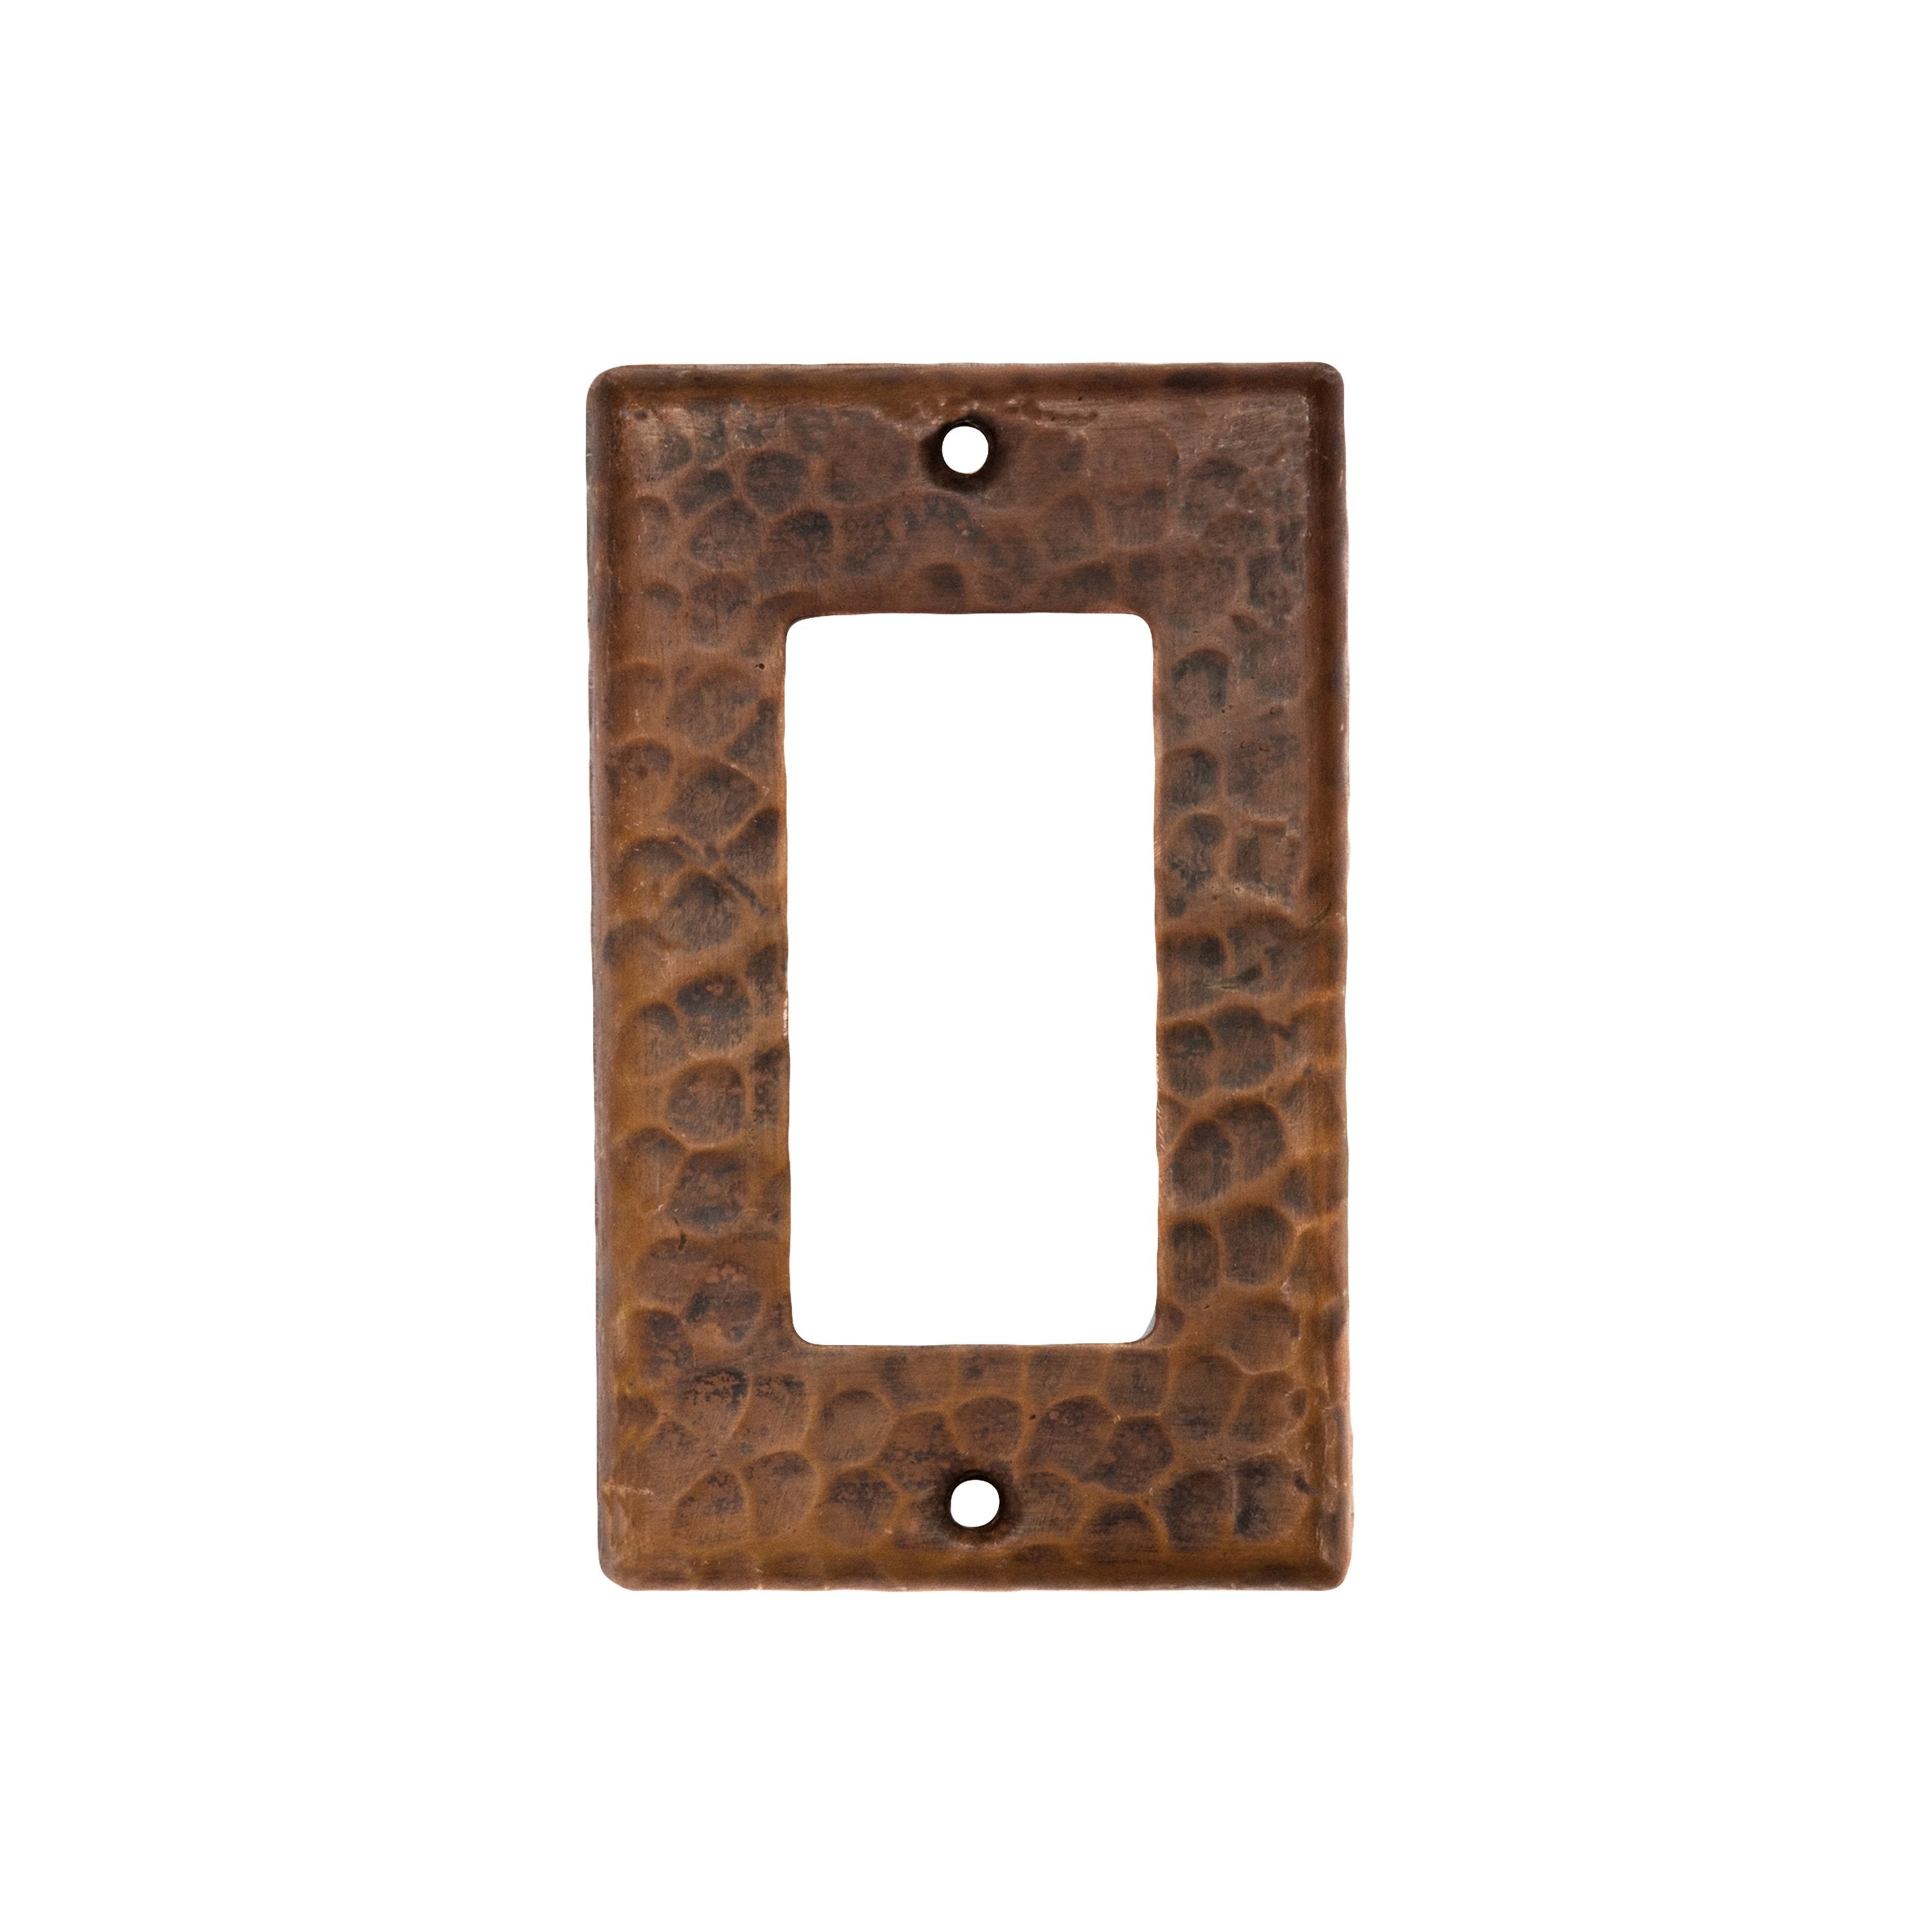 Premier Copper Products Copper Single Ground Fault/Rocker GFI Switchplate Cover - Quantity 2-DirectSinks